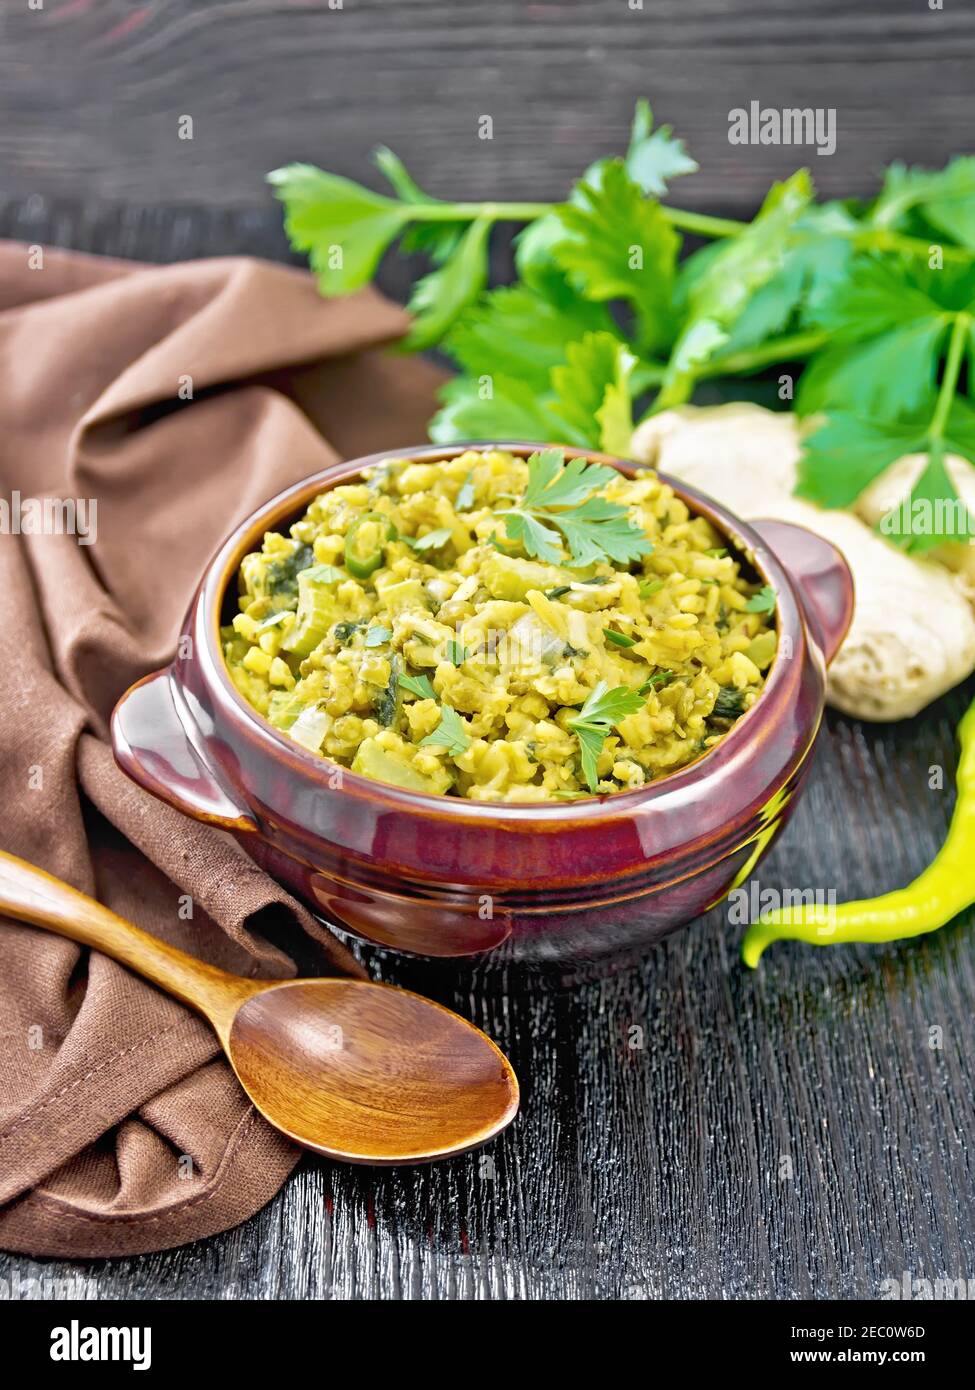 Indian national dish of kichari of mung bean, rice, celery, spinach, hot pepper and spices in a bowl on a napkin, ginger and spoon on wooden board bac Stock Photo